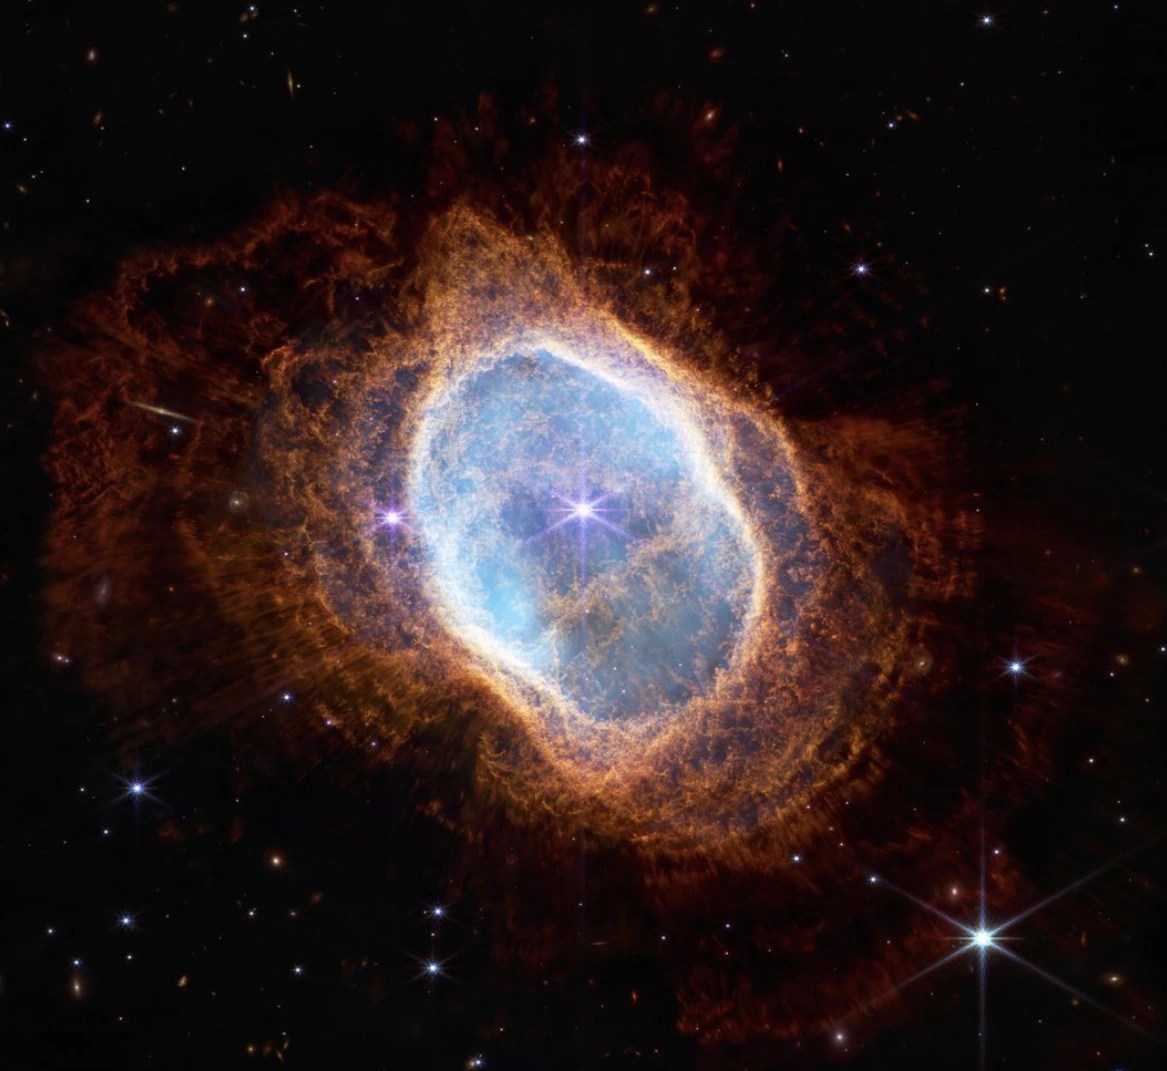 A planetary nebula, seen by the Webb telescope's NIRCam instrument, against the blackness of space, with points of starlight behind it. The nebula itself is shaped like an irregular oval, with lacy, reddish orange plumes of gas and dust.